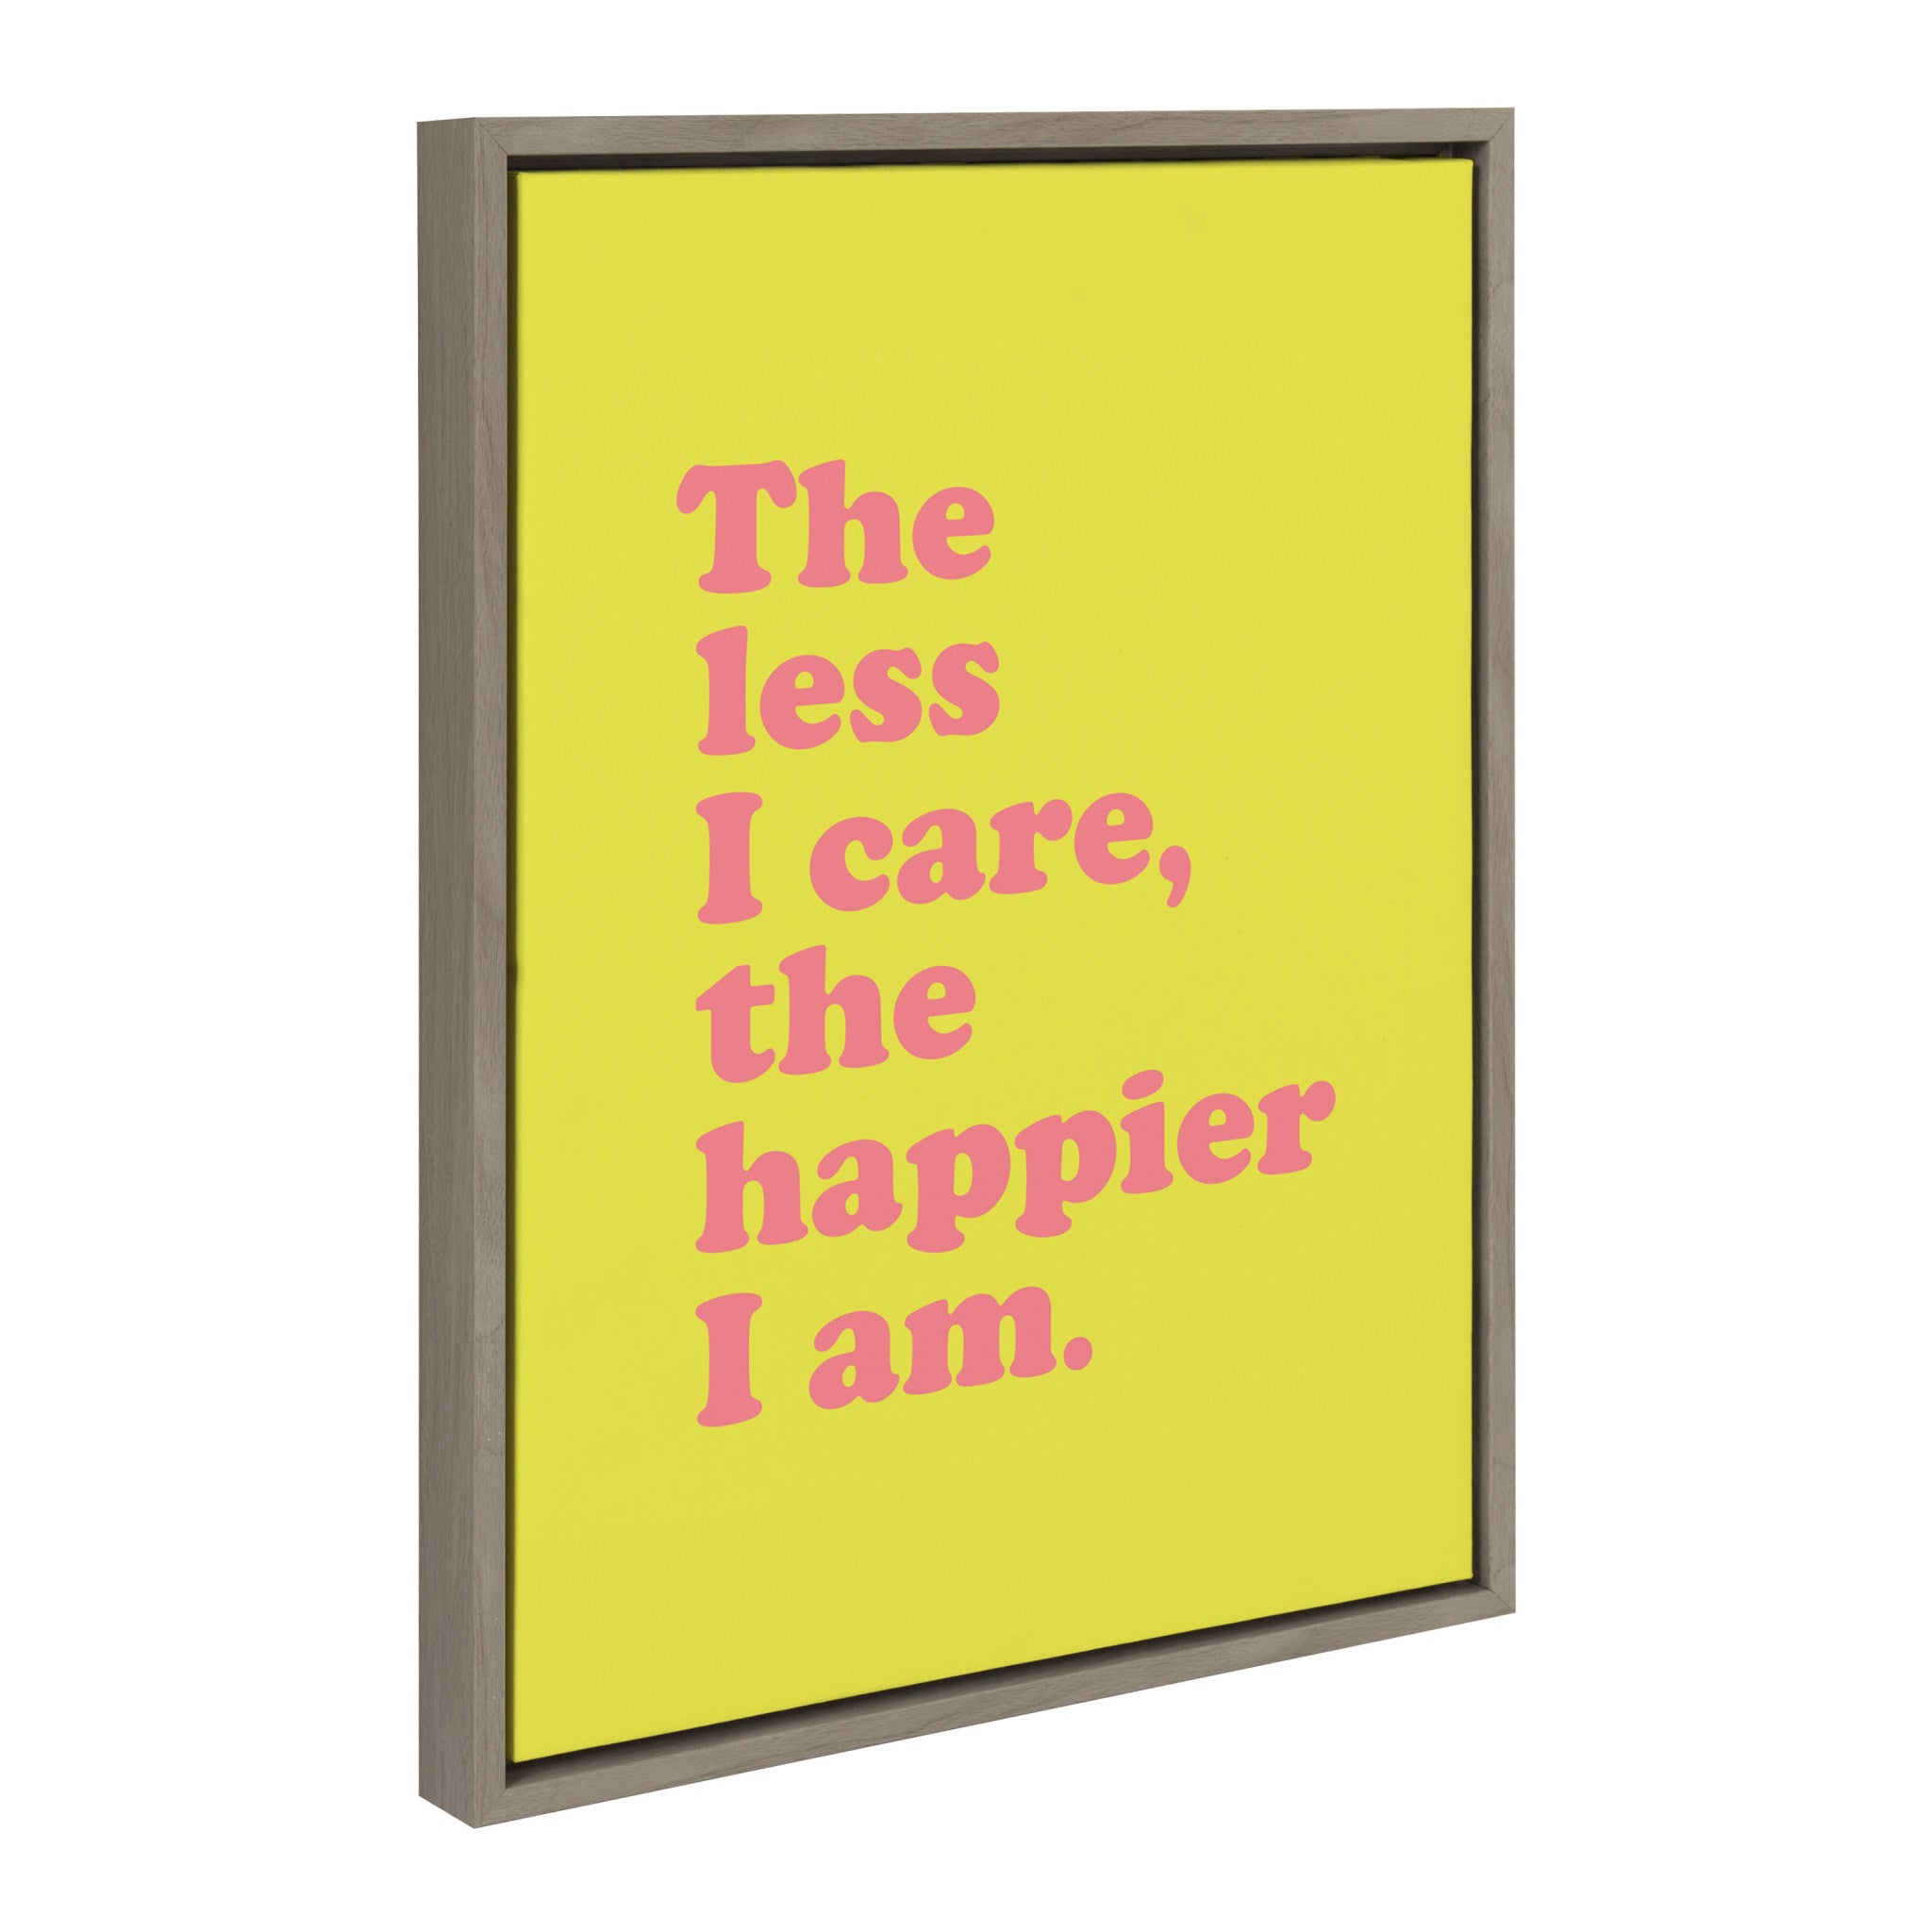 Sylvie Less I Care Happier I am in Yellow and Pink Framed Canvas by Apricot and Birch